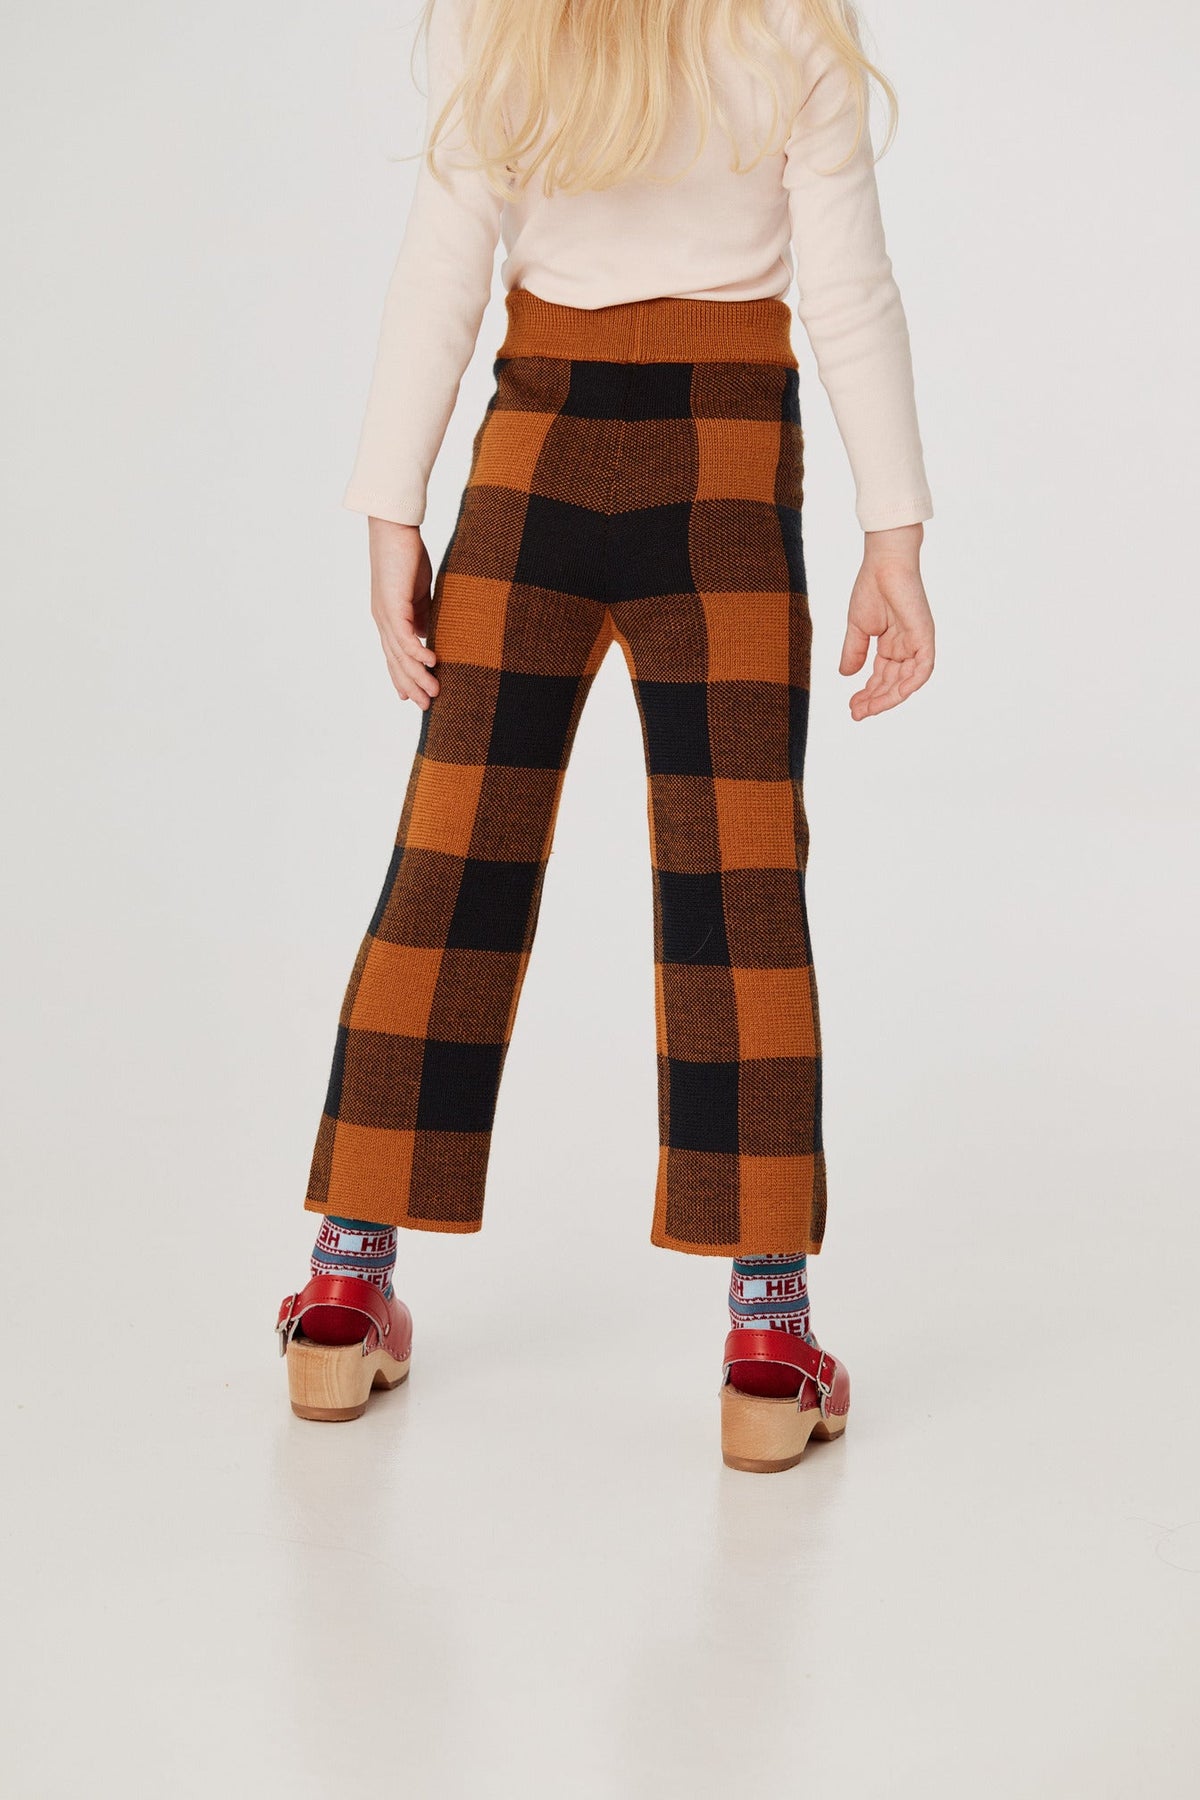 Plaid Slim Pant - Marigold+Model is 45 inches tall, 40lbs, wearing a size 4-5y